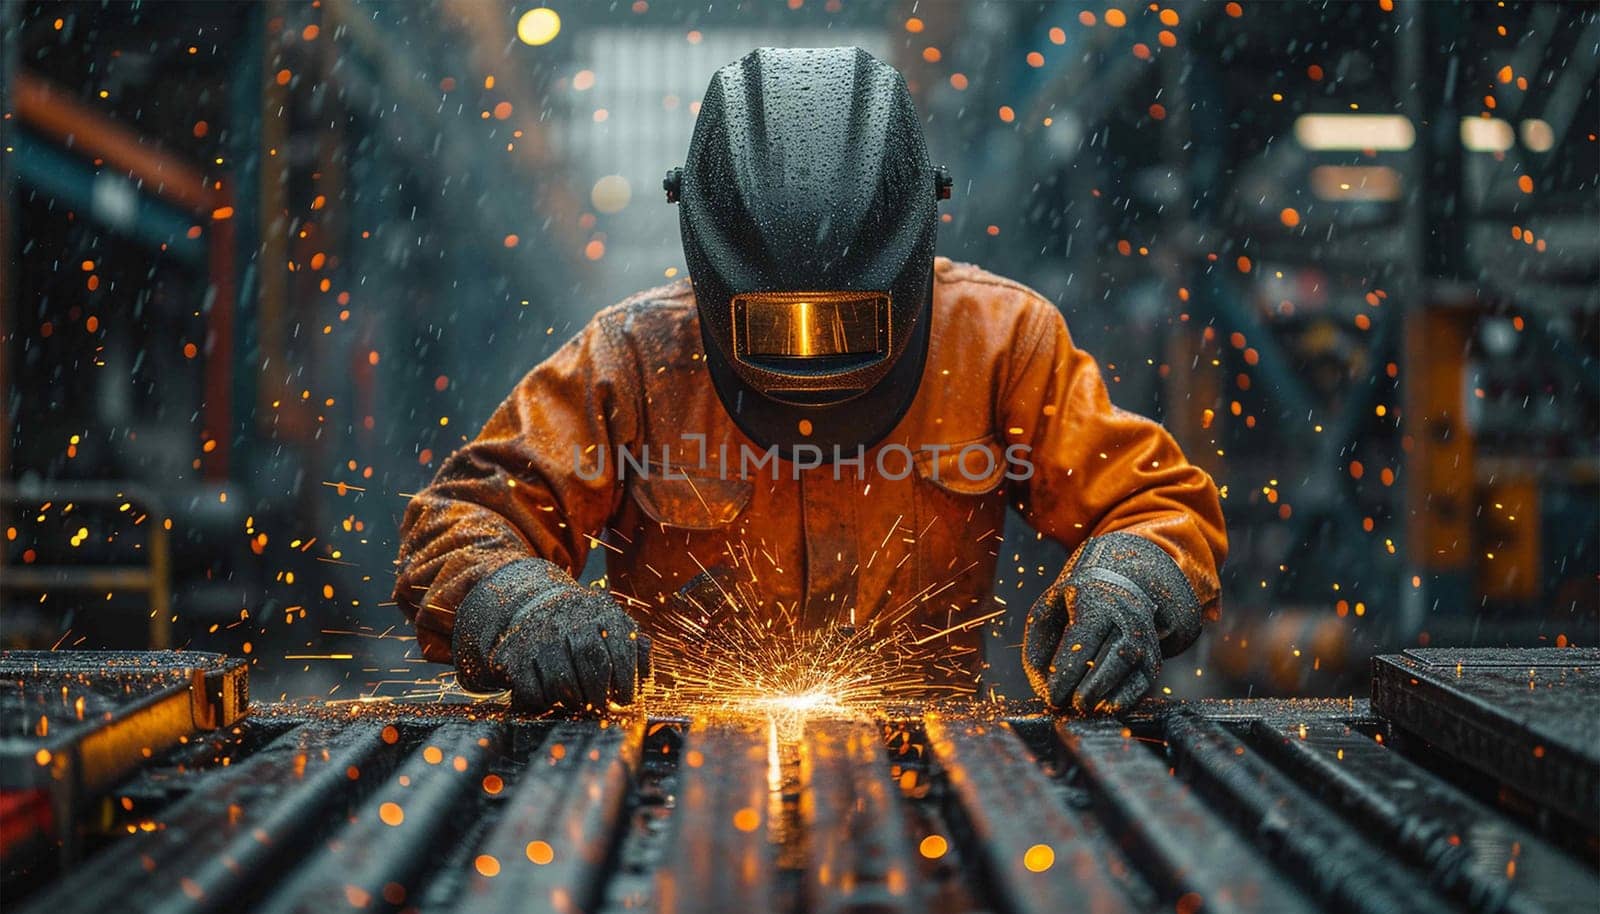 Proffessional welder at work. Handymen performing welding and grinding at their workplace in the workshop, while the sparks "fly" all around them, they wear a protective helmet and equipment. Sparkling lights by Annebel146